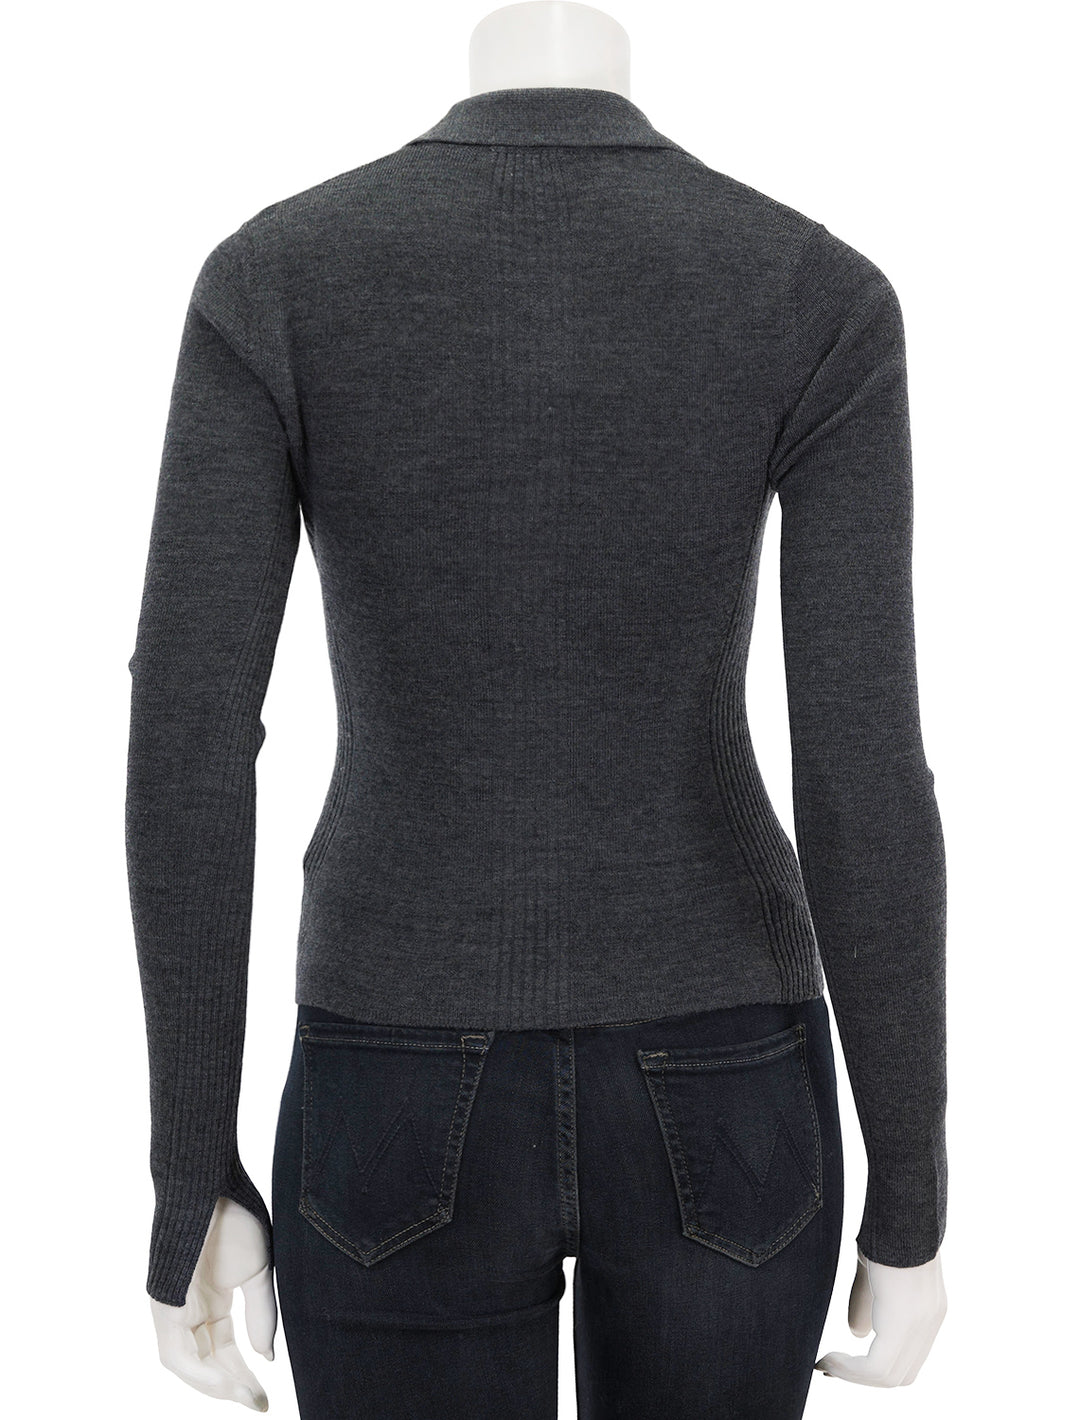 Back view of GANNI's mini ribbed merino polo in frost grey.